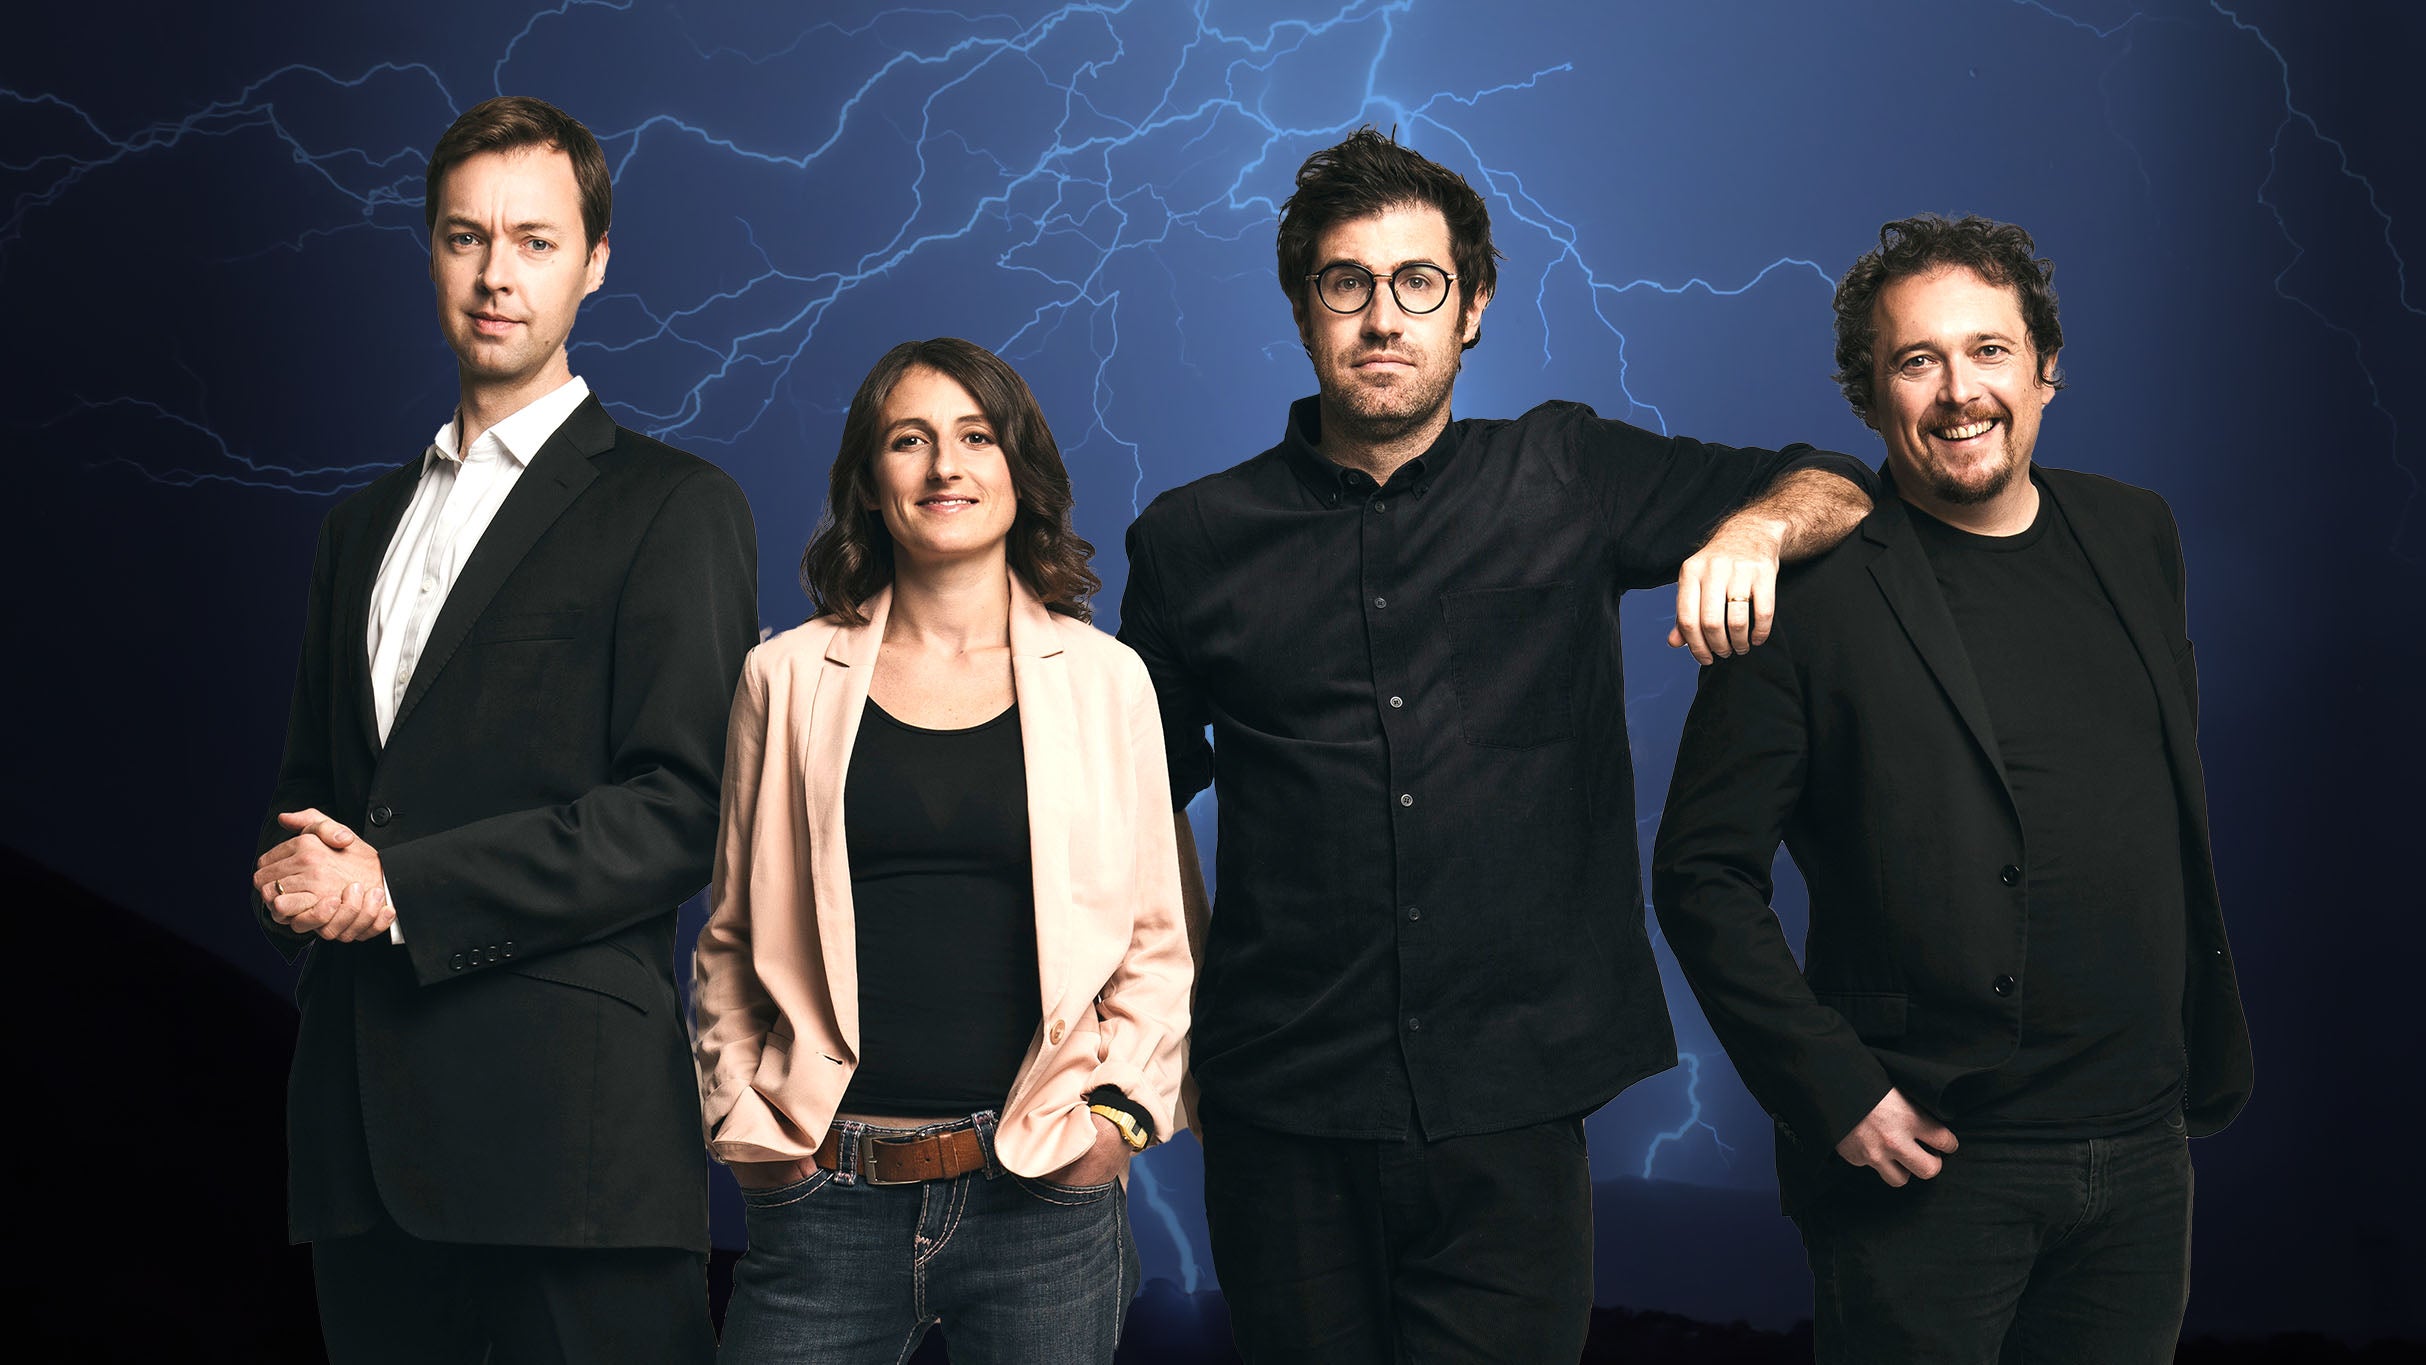 No Such Thing As A Fish in Wellington promo photo for Live in WLG presale offer code